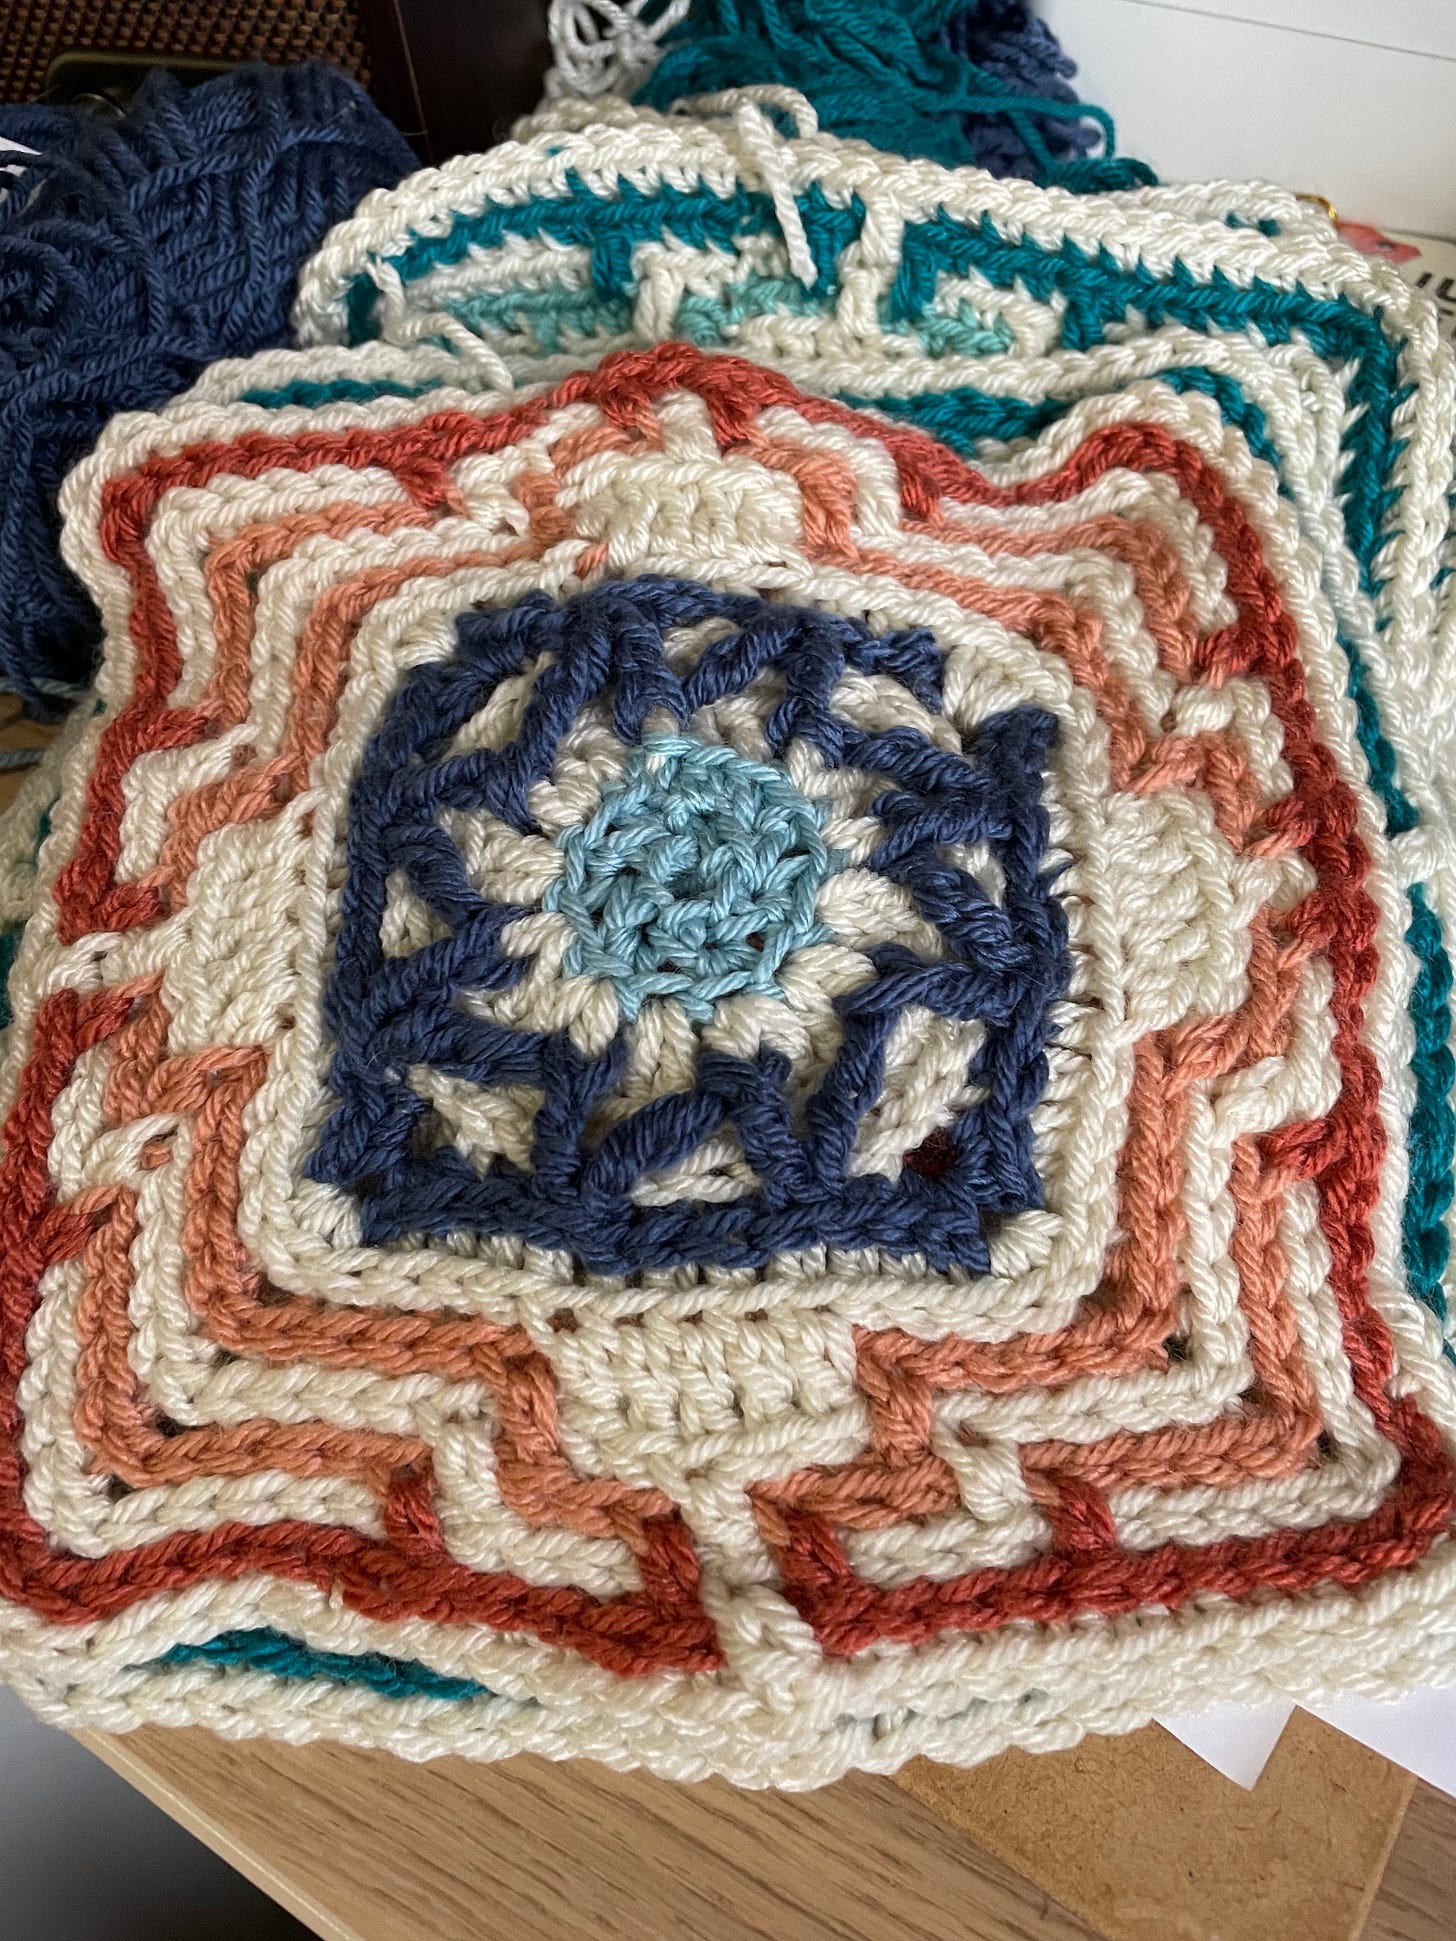 several intricately crosheted squares in colors of red and white and blue. There is a star shaped pattern in the middle and mosiac patterns around the edges